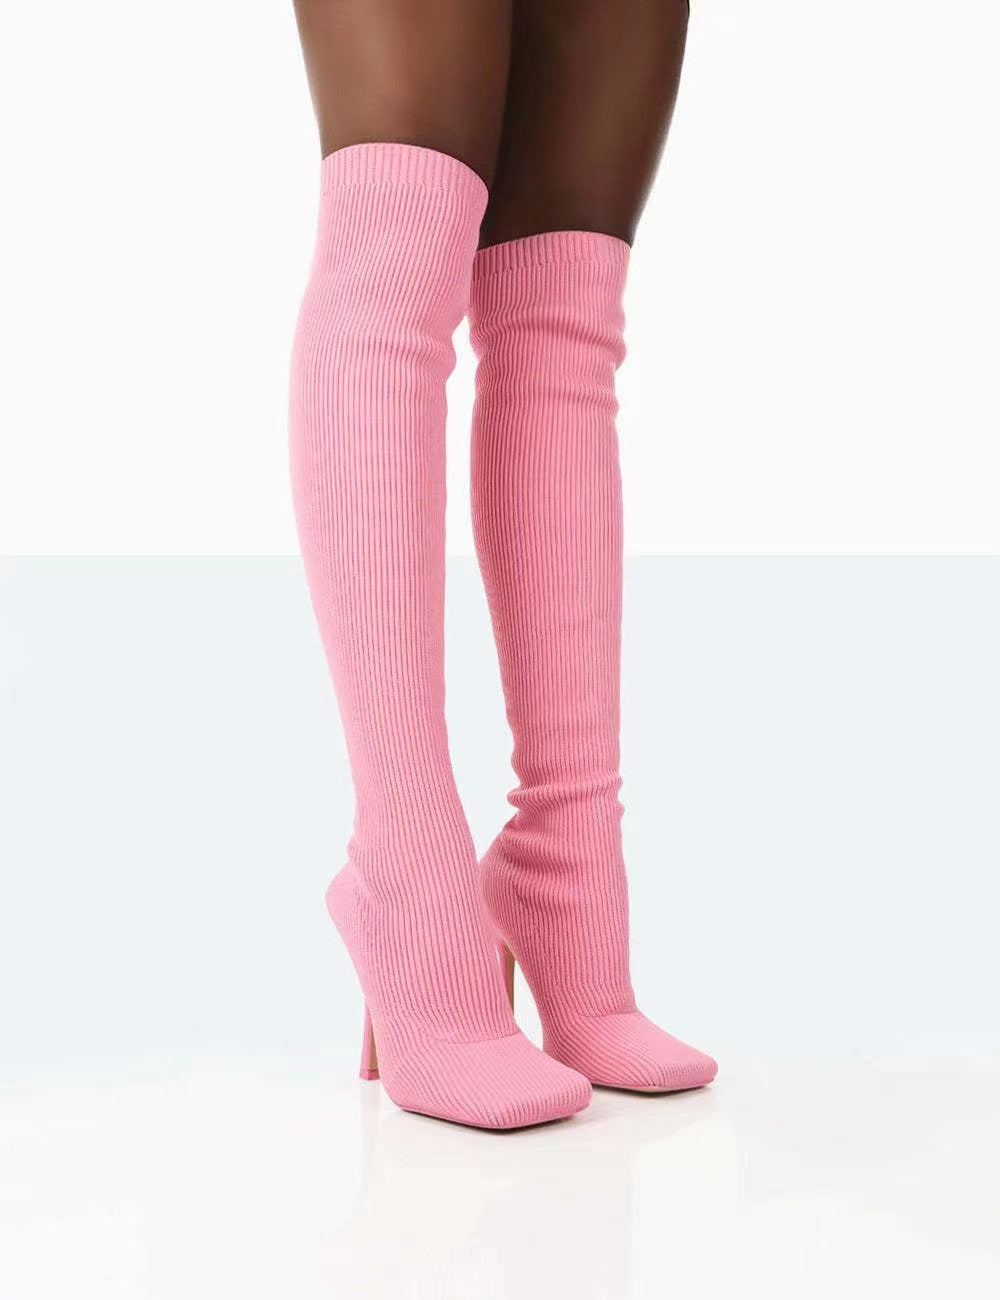 Heeled Boots  | Women's Over The Knee Long knitted heeled Boots | thecurvestory.myshopify.com